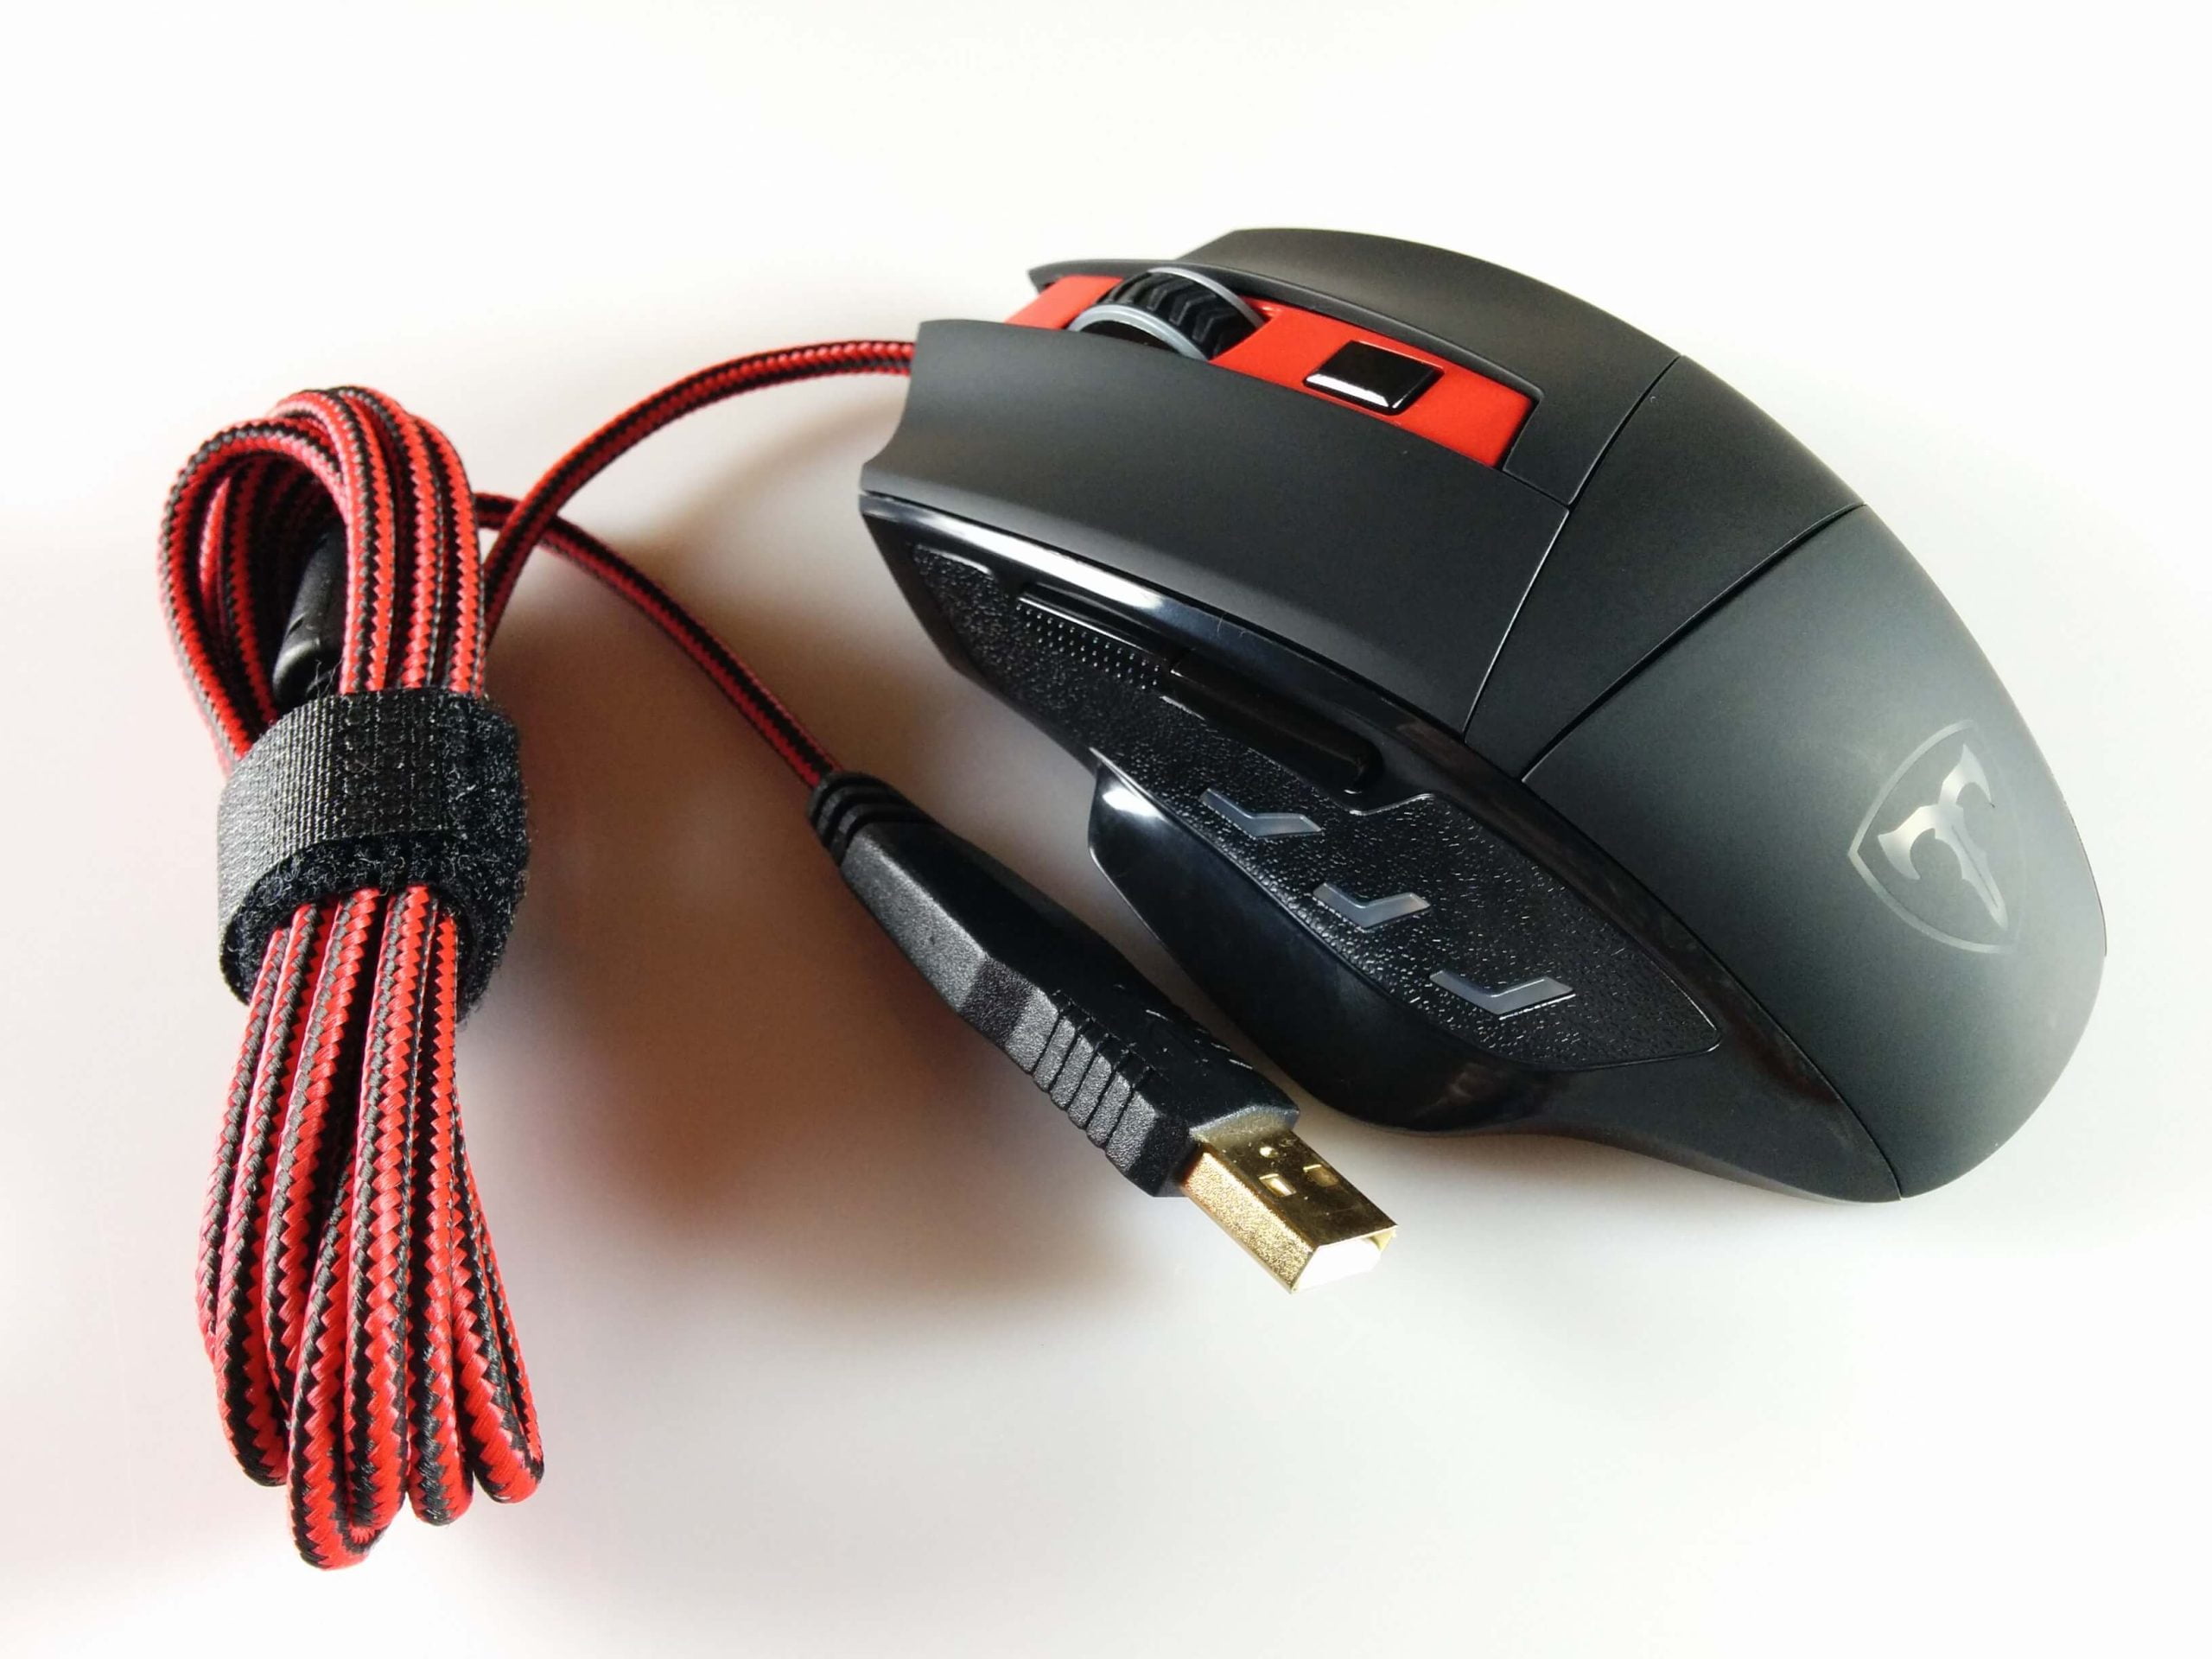 VicTsing gaming mouse top view